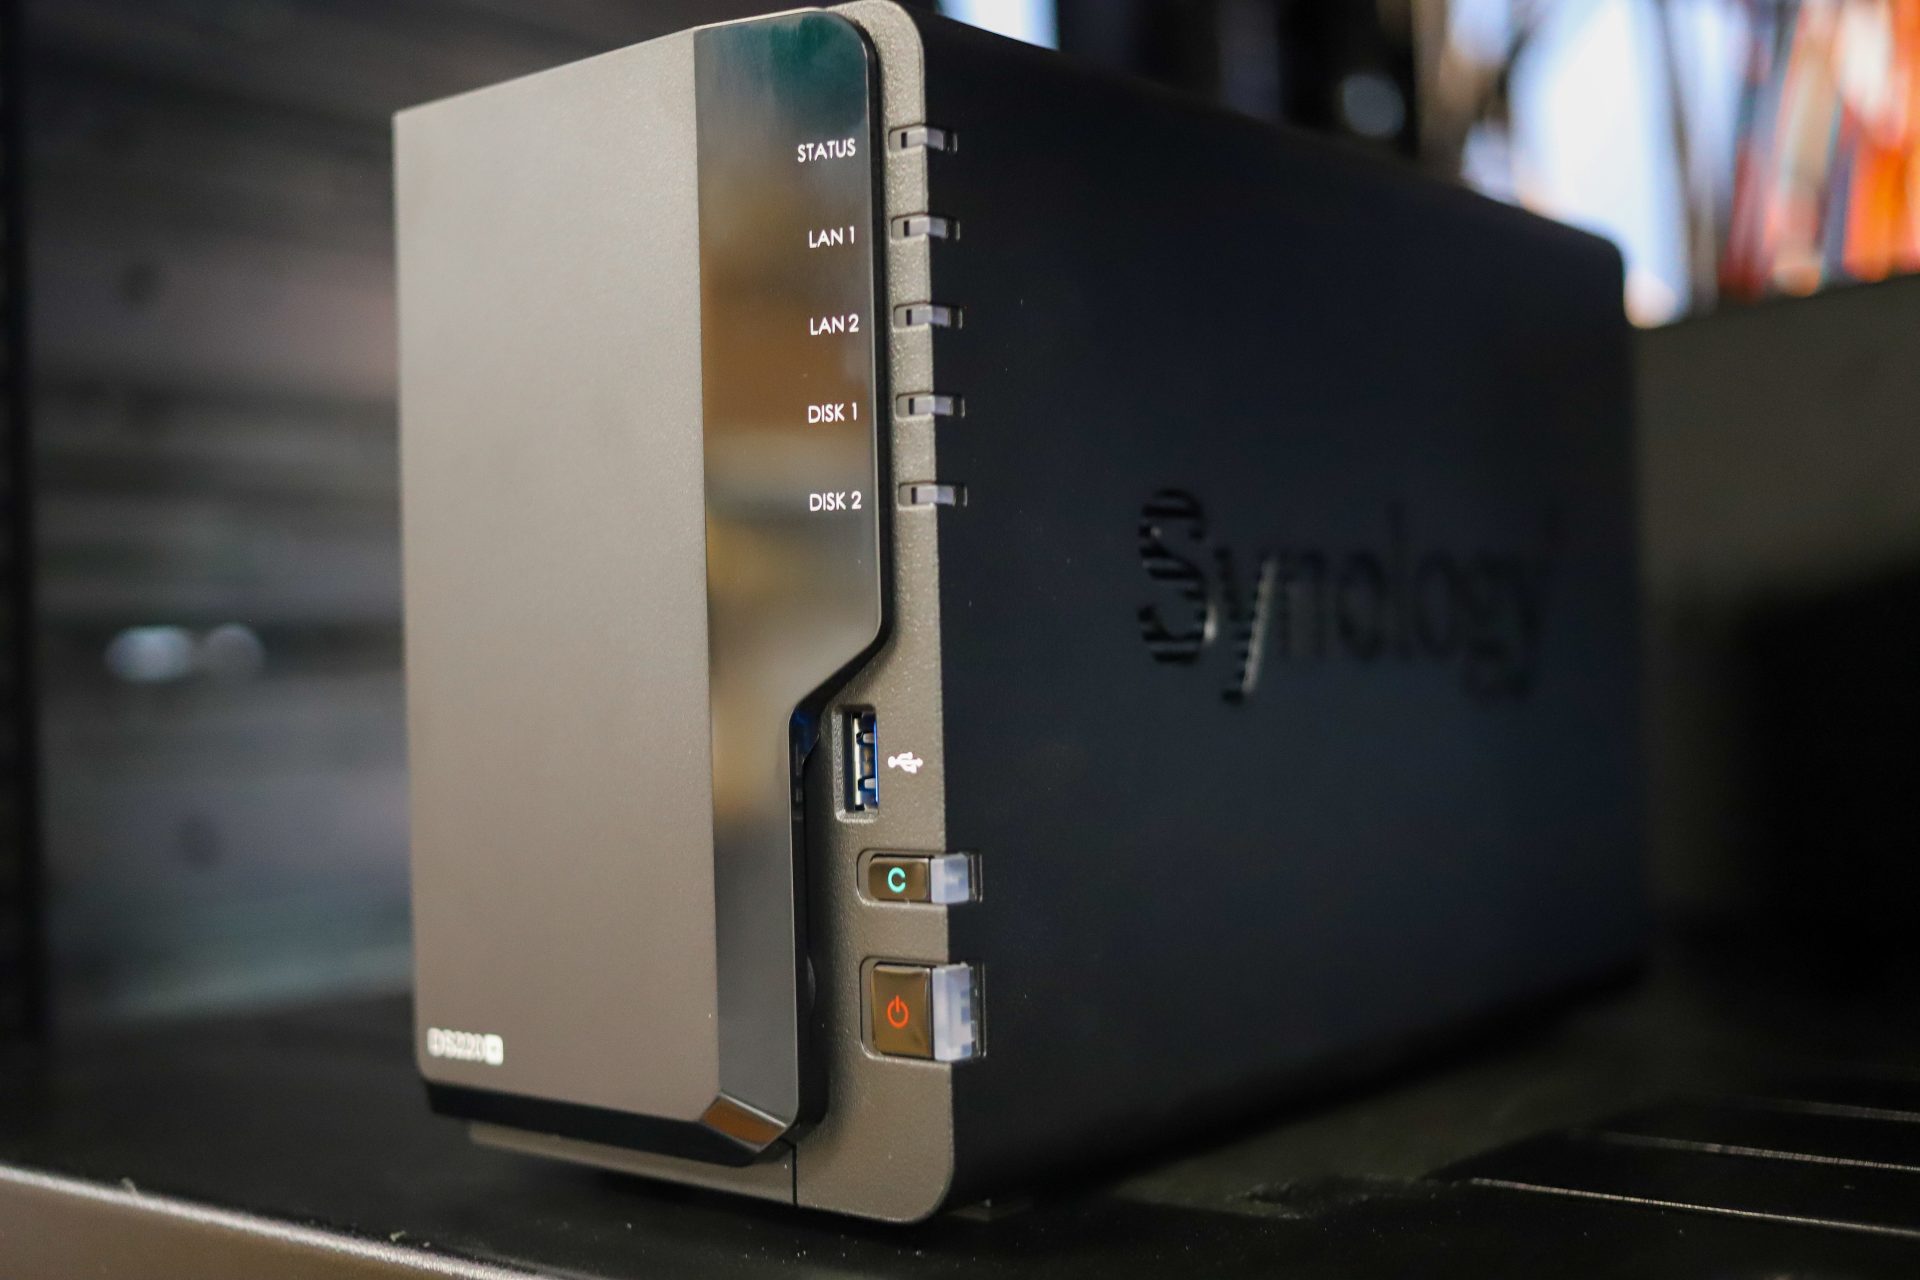 Synology DS220+ overview